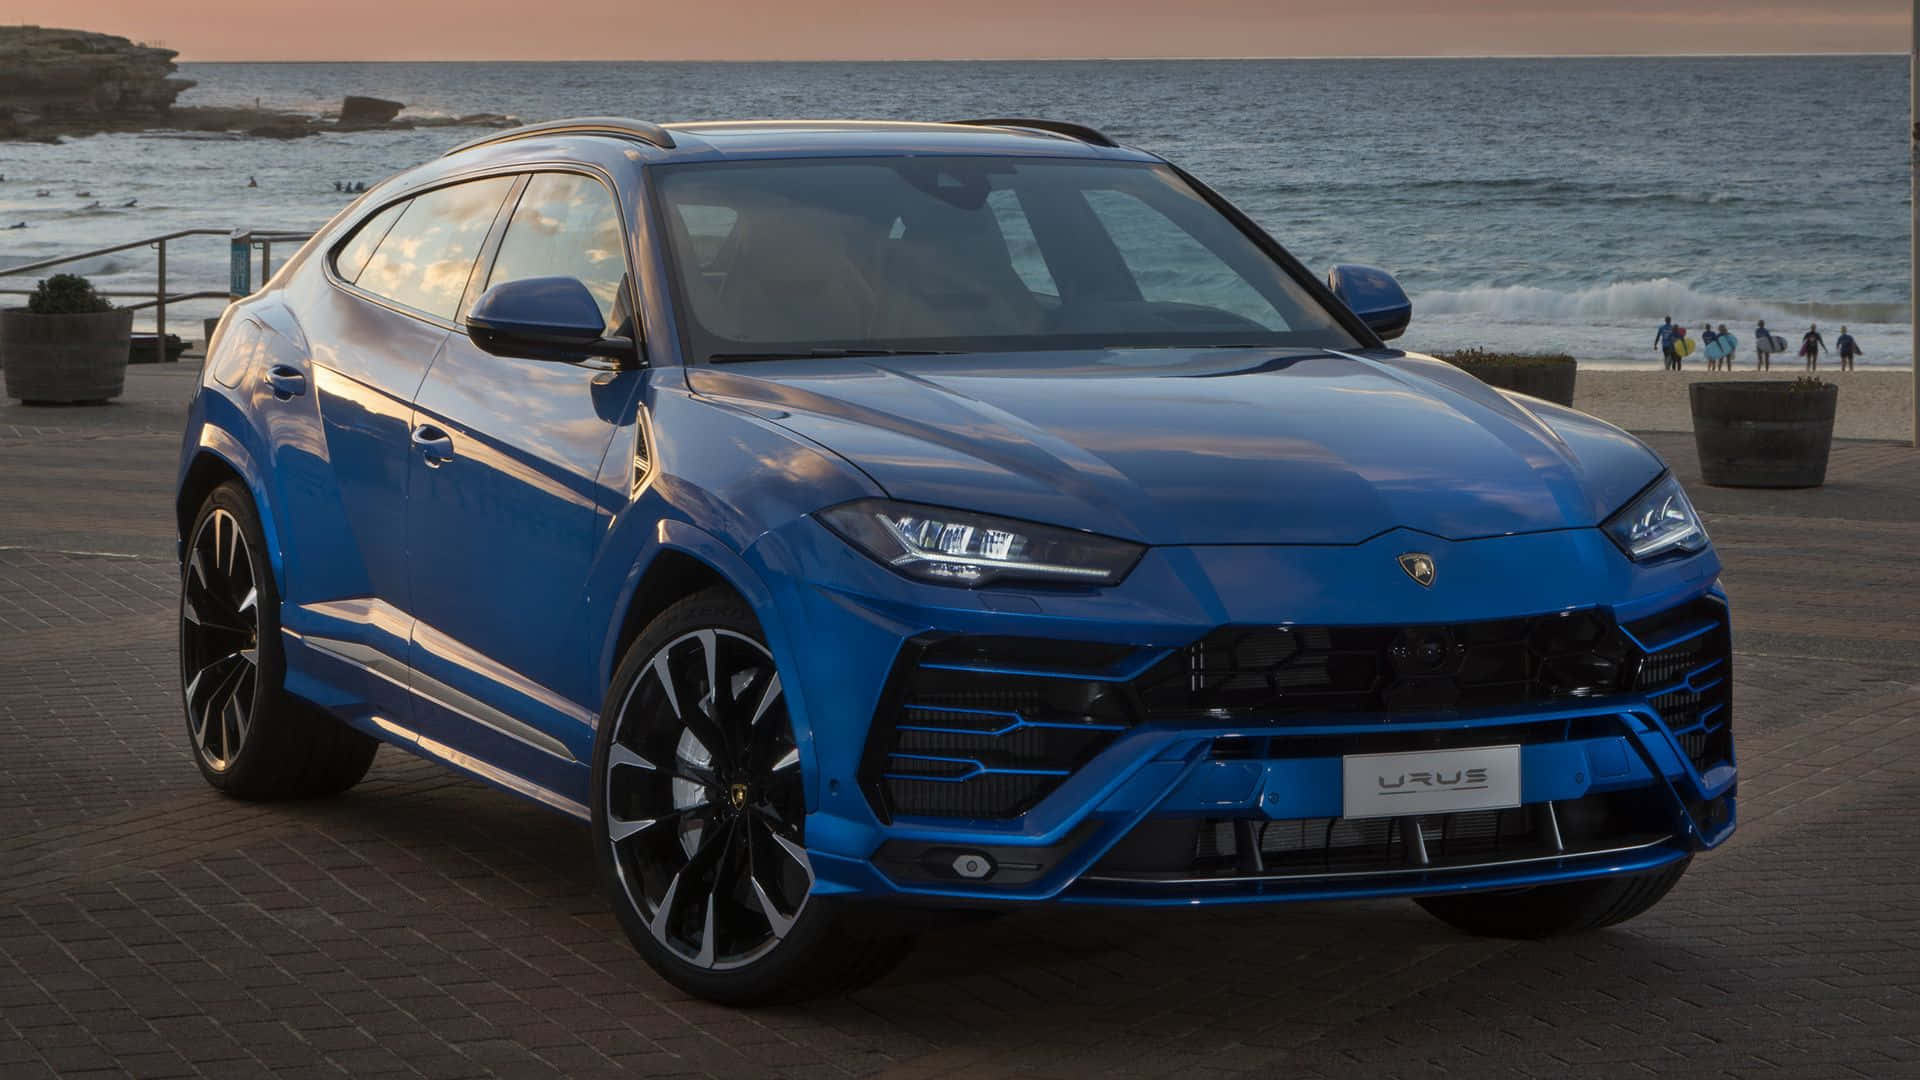 Experience Unmatched Luxury and Performance - The Lamborghini Urus Wallpaper